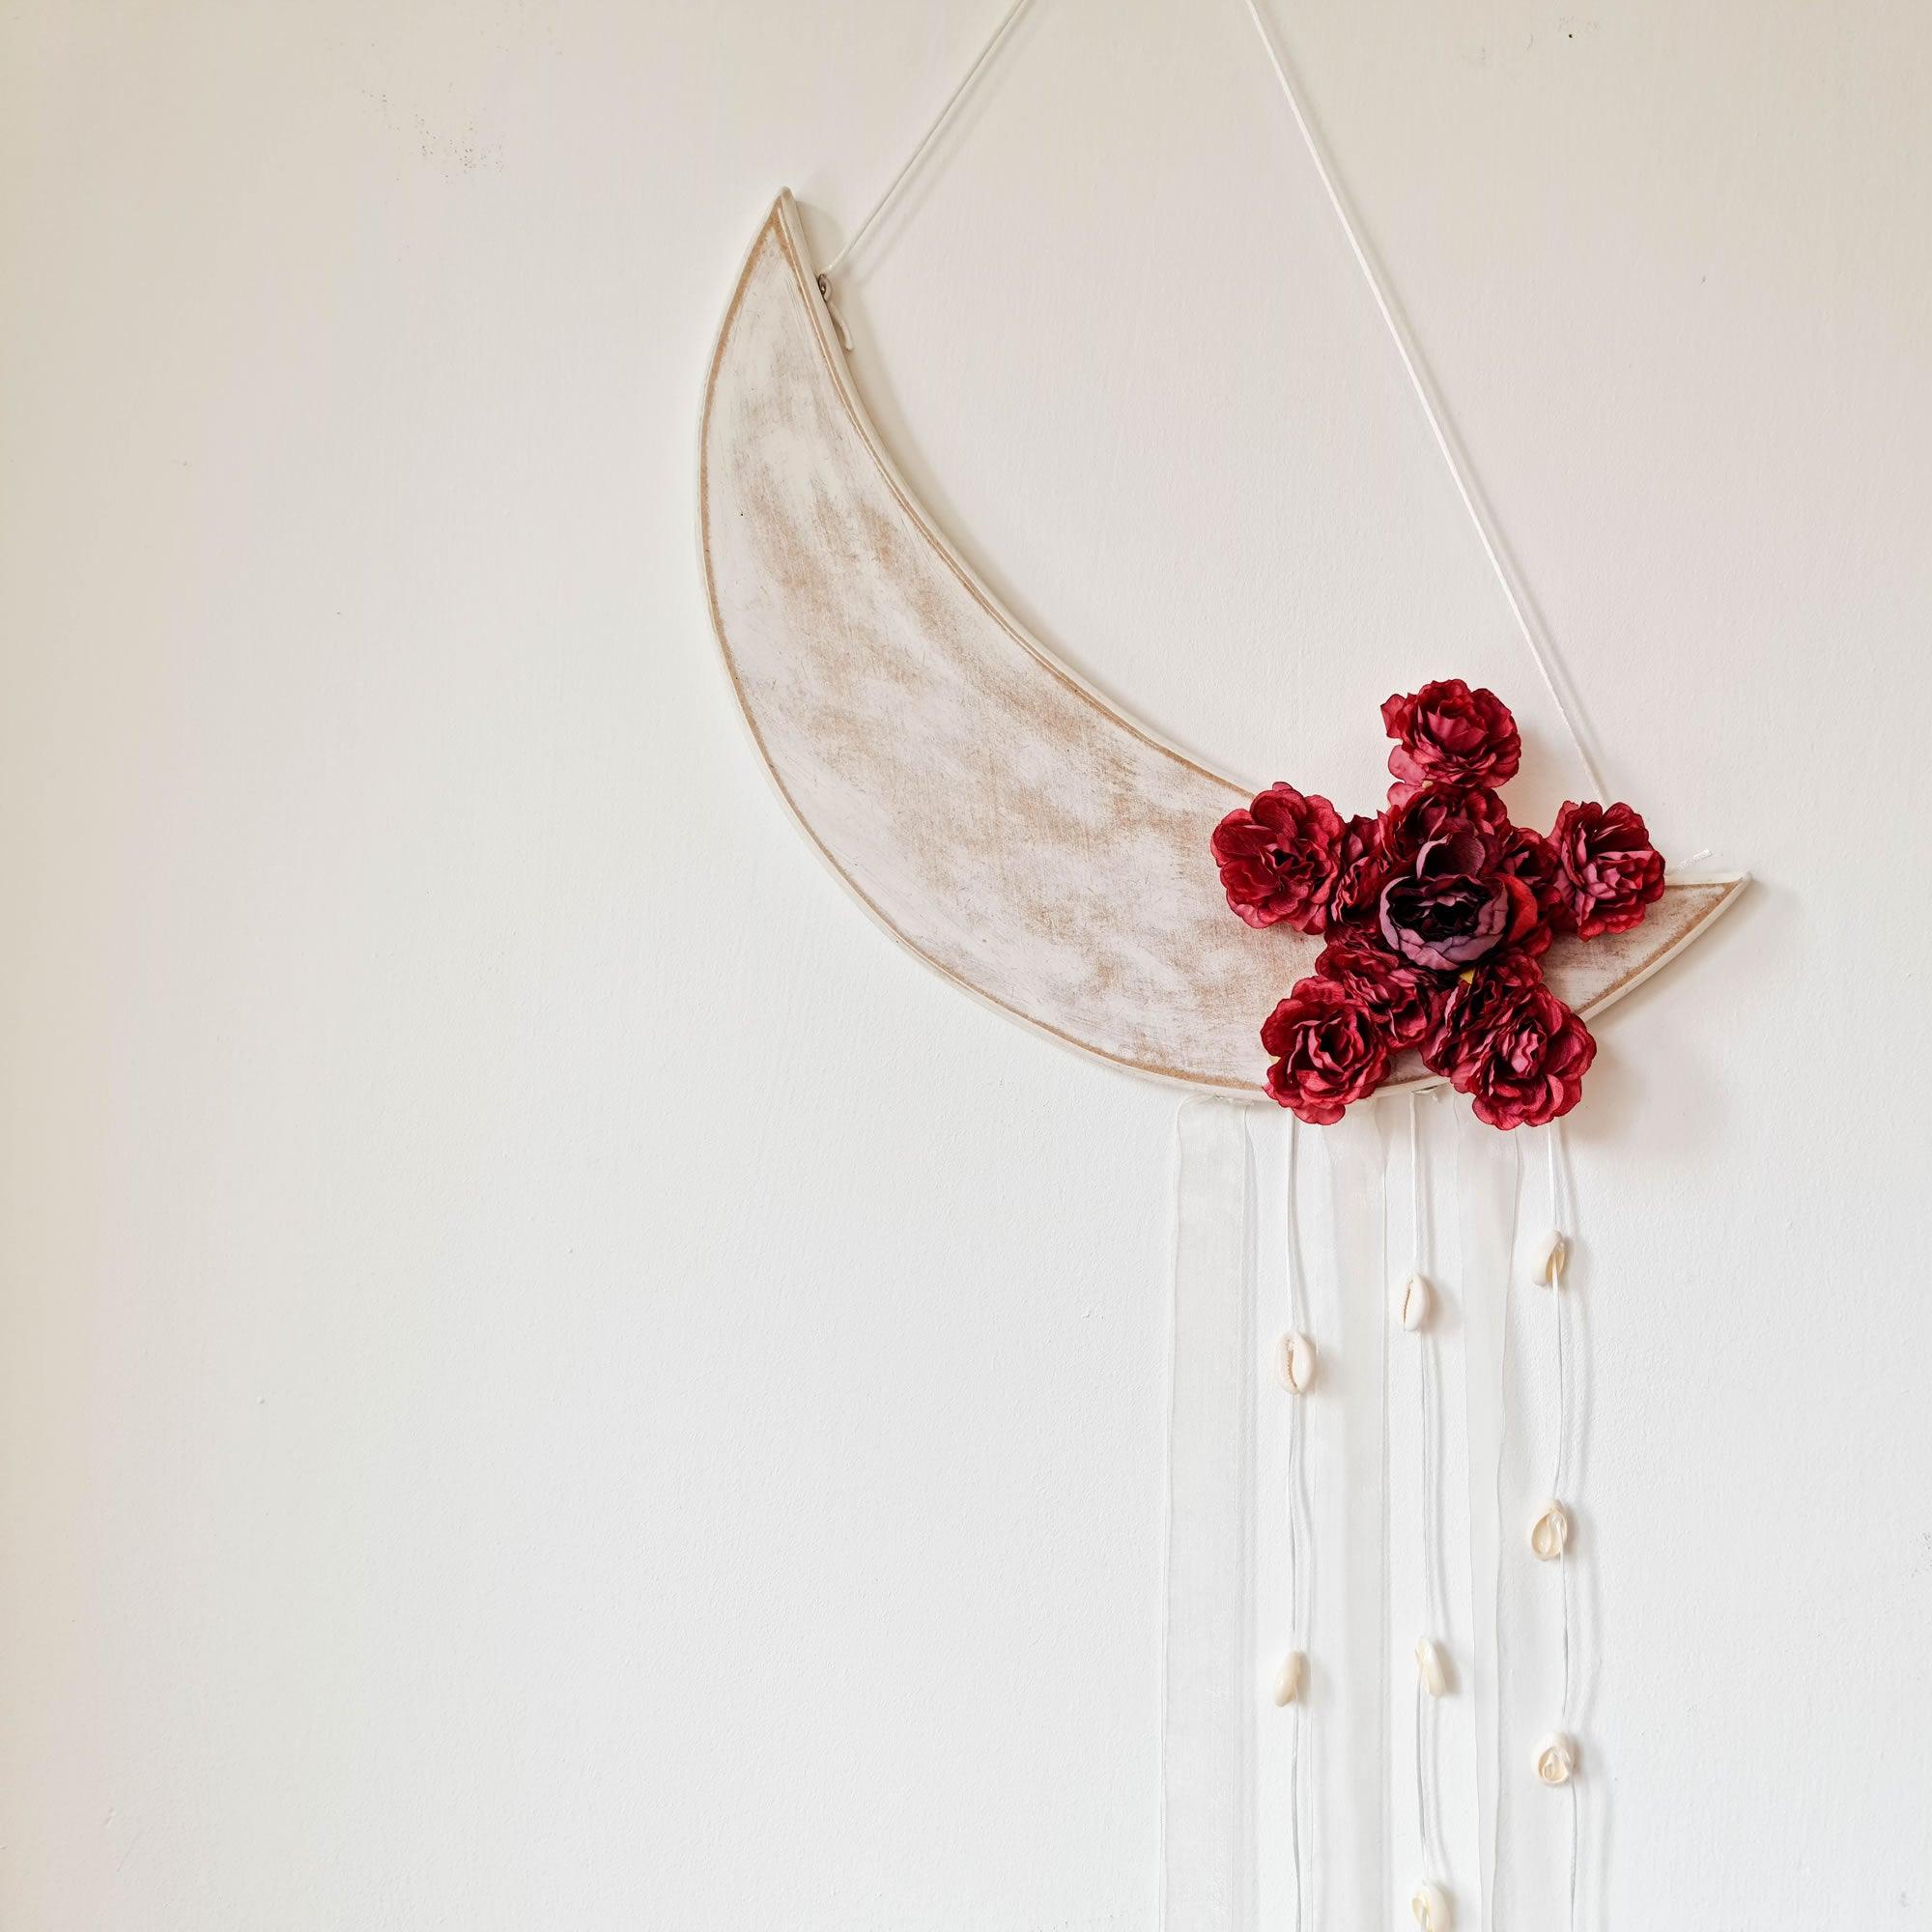 Bohemian Moon Star Flower Decorative Wall Hanging - 40 x 90 cm Dream Catcher Wedding Gift for her